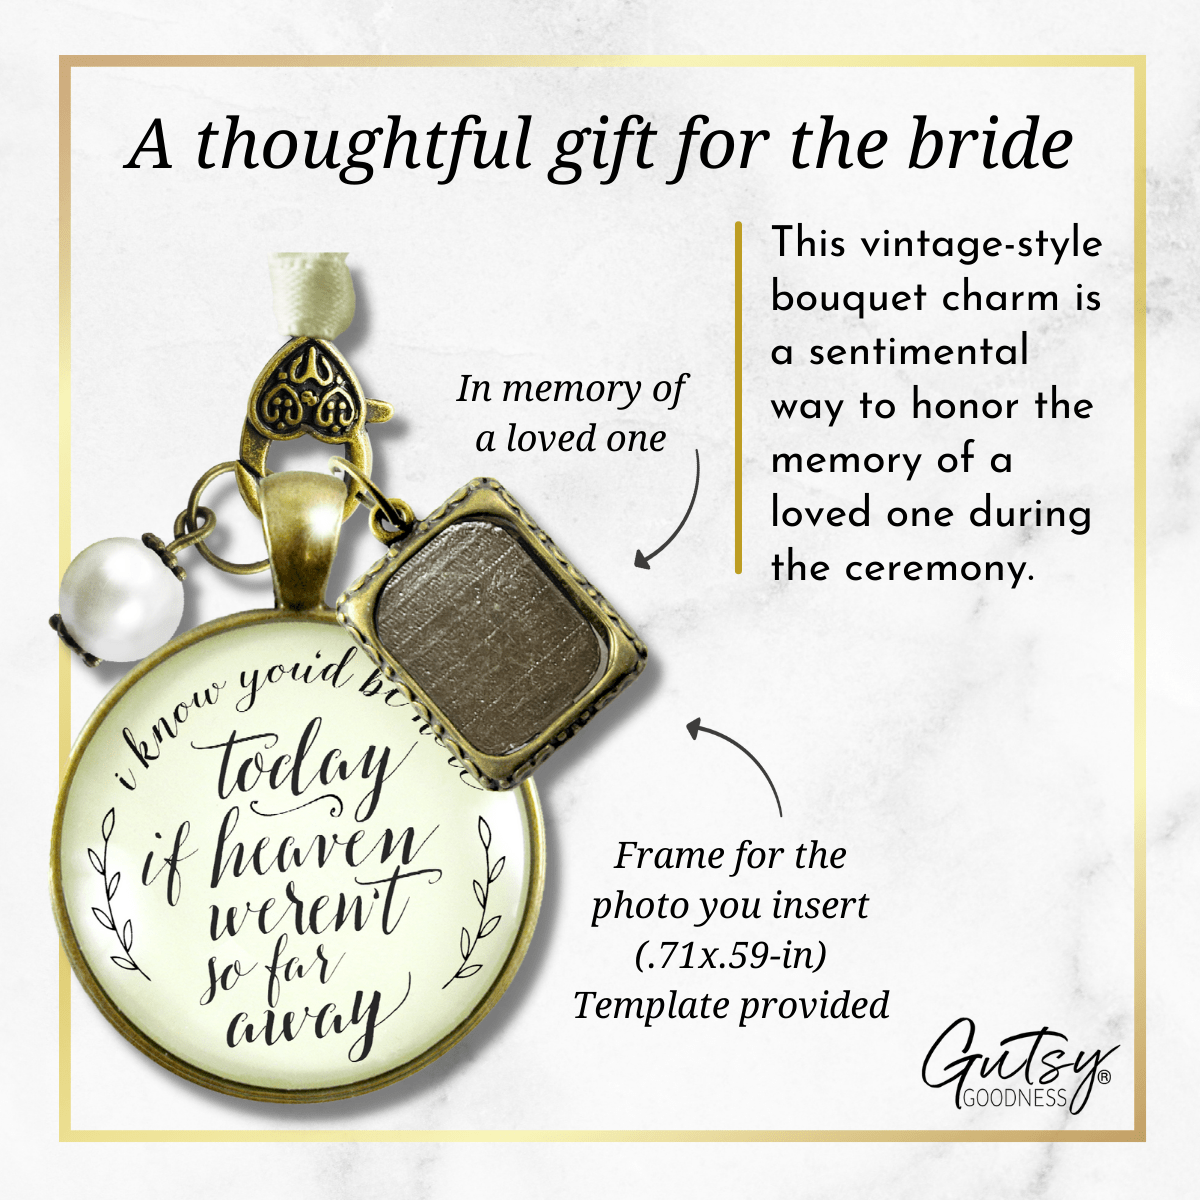 Wedding Bouquet Memorial Charm I Know You'd Be Here Heaven Rustic Memory Photo Jewel - Gutsy Goodness Handmade Jewelry Gifts